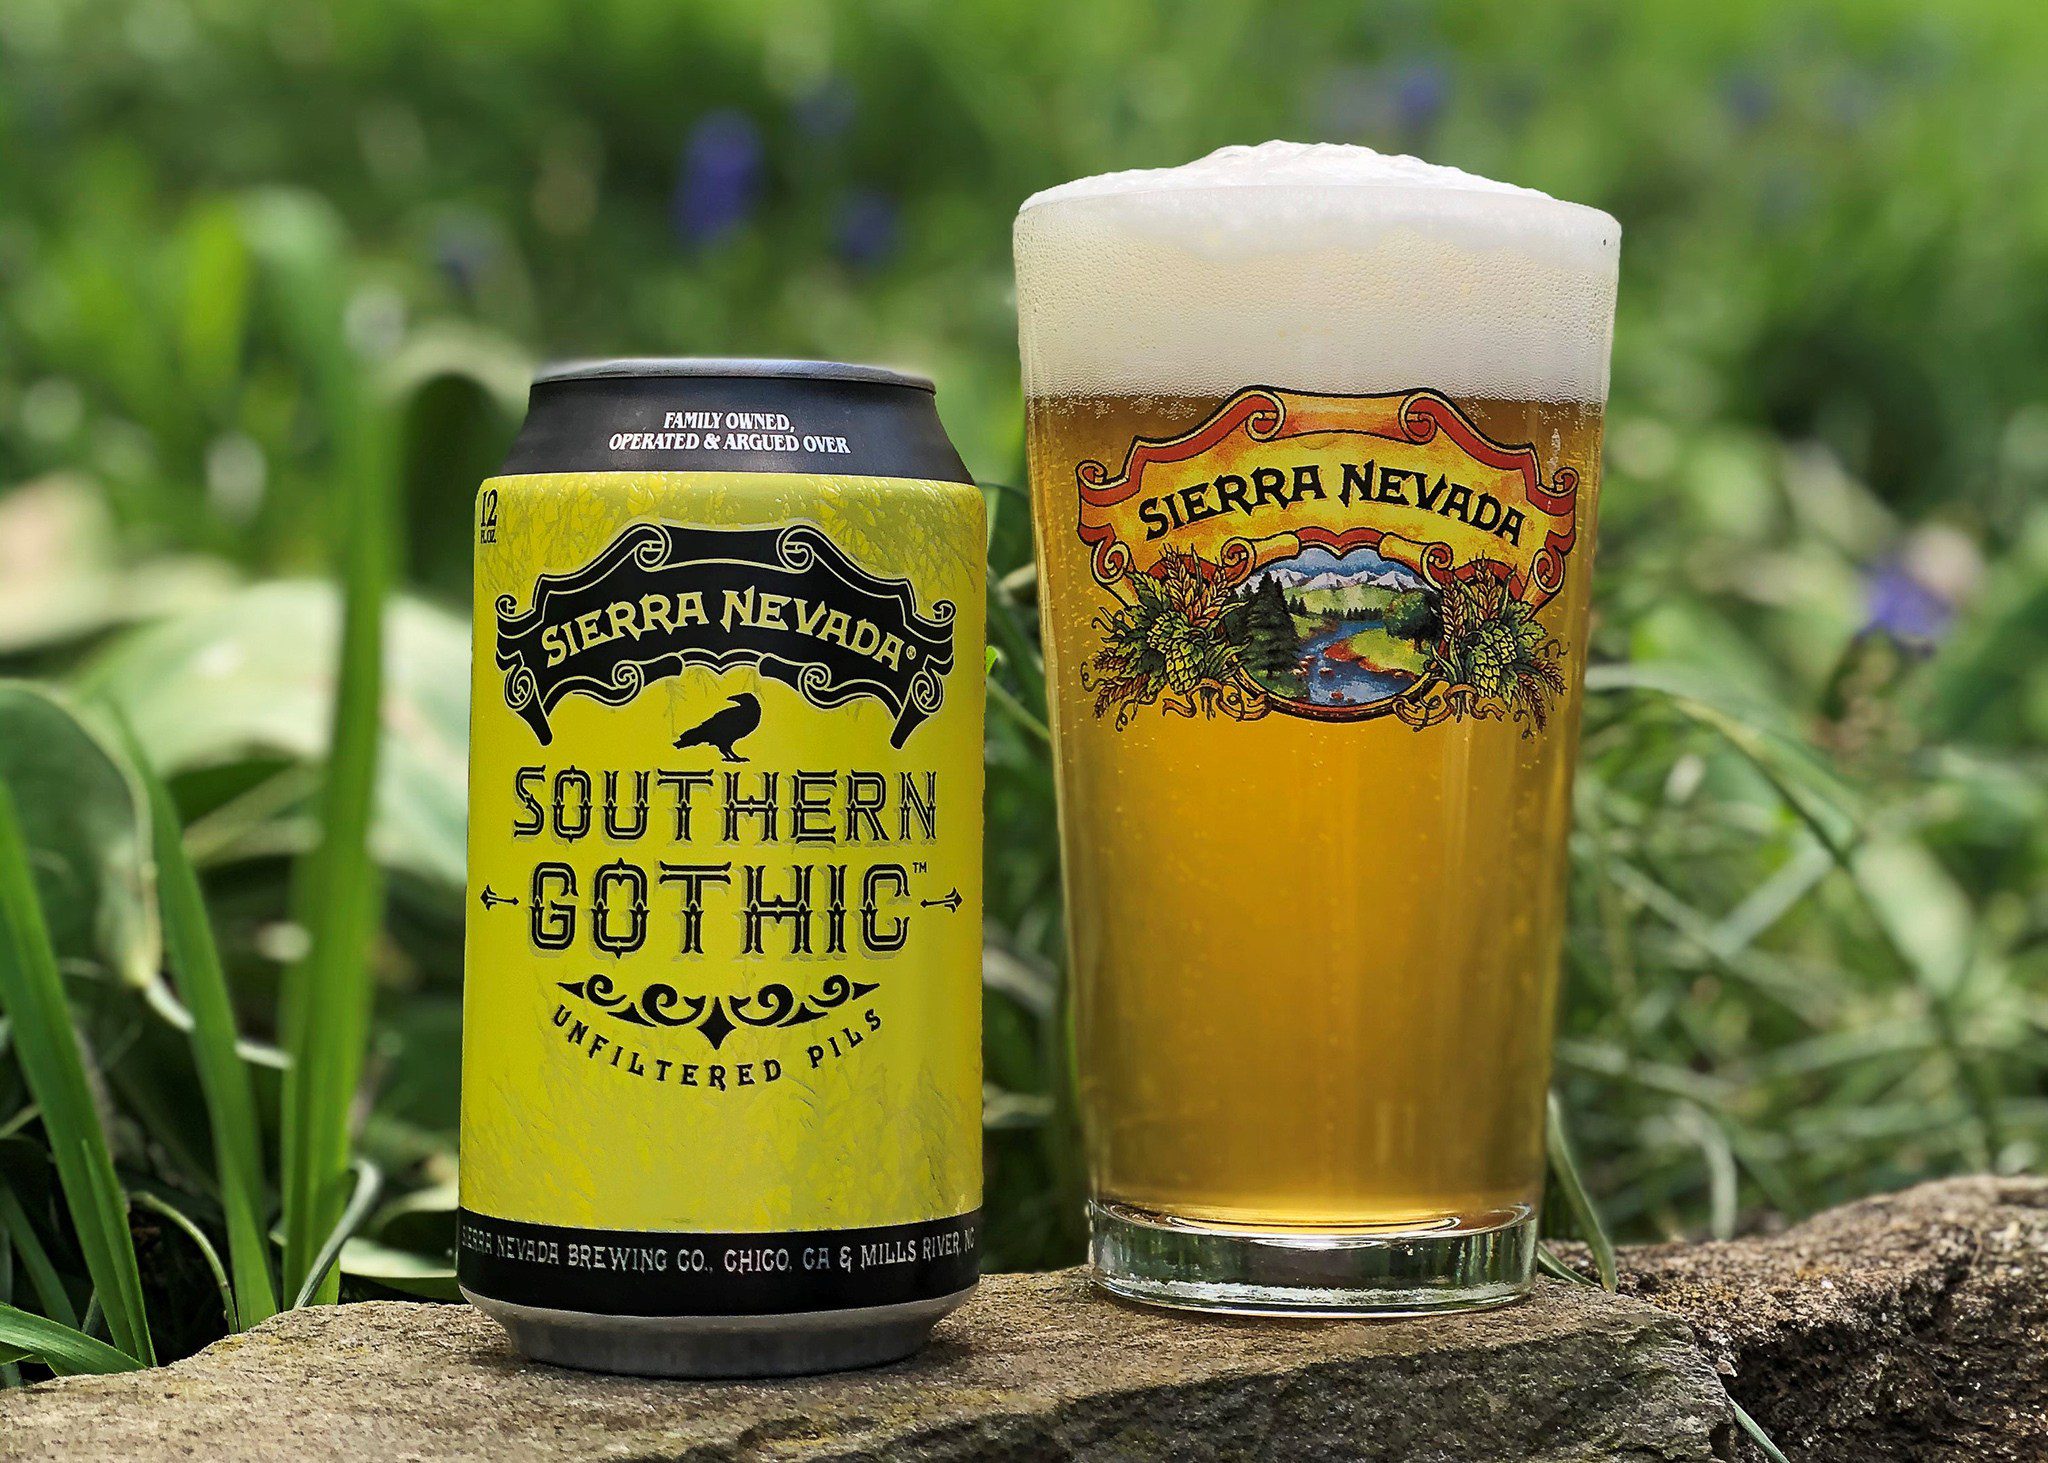 Can and full glass of Sierra Nevada Southern Gothic Pilsner